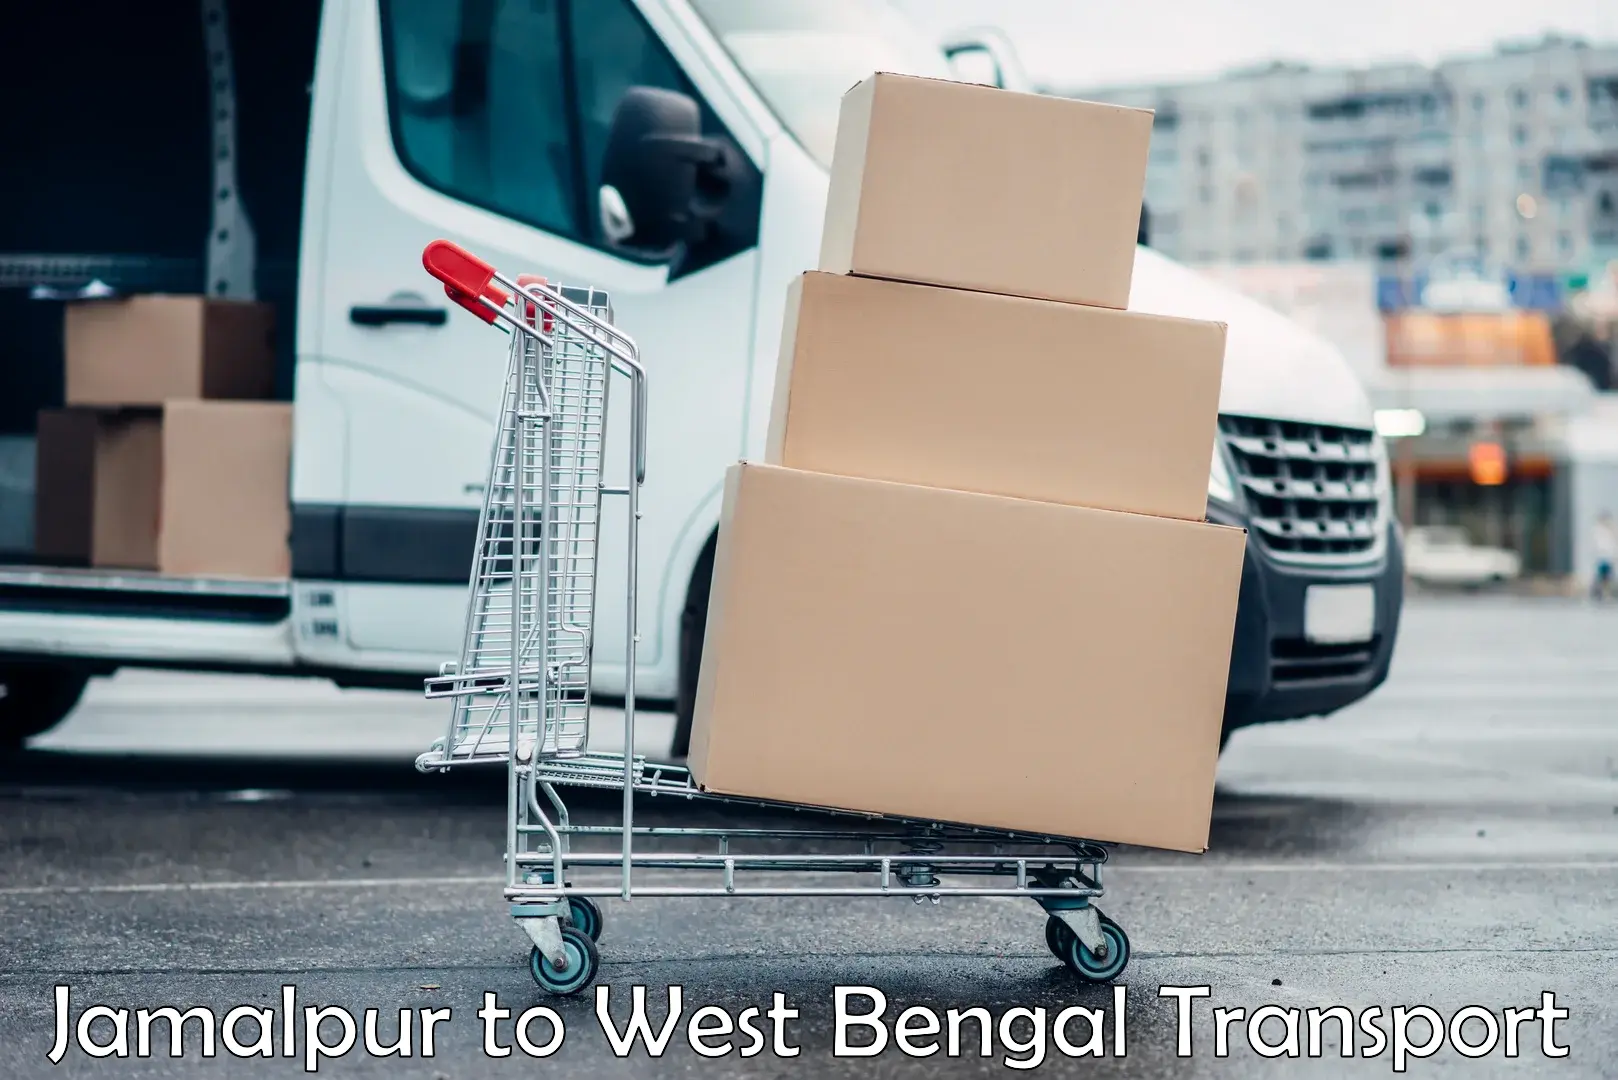 Parcel transport services in Jamalpur to Jhalong